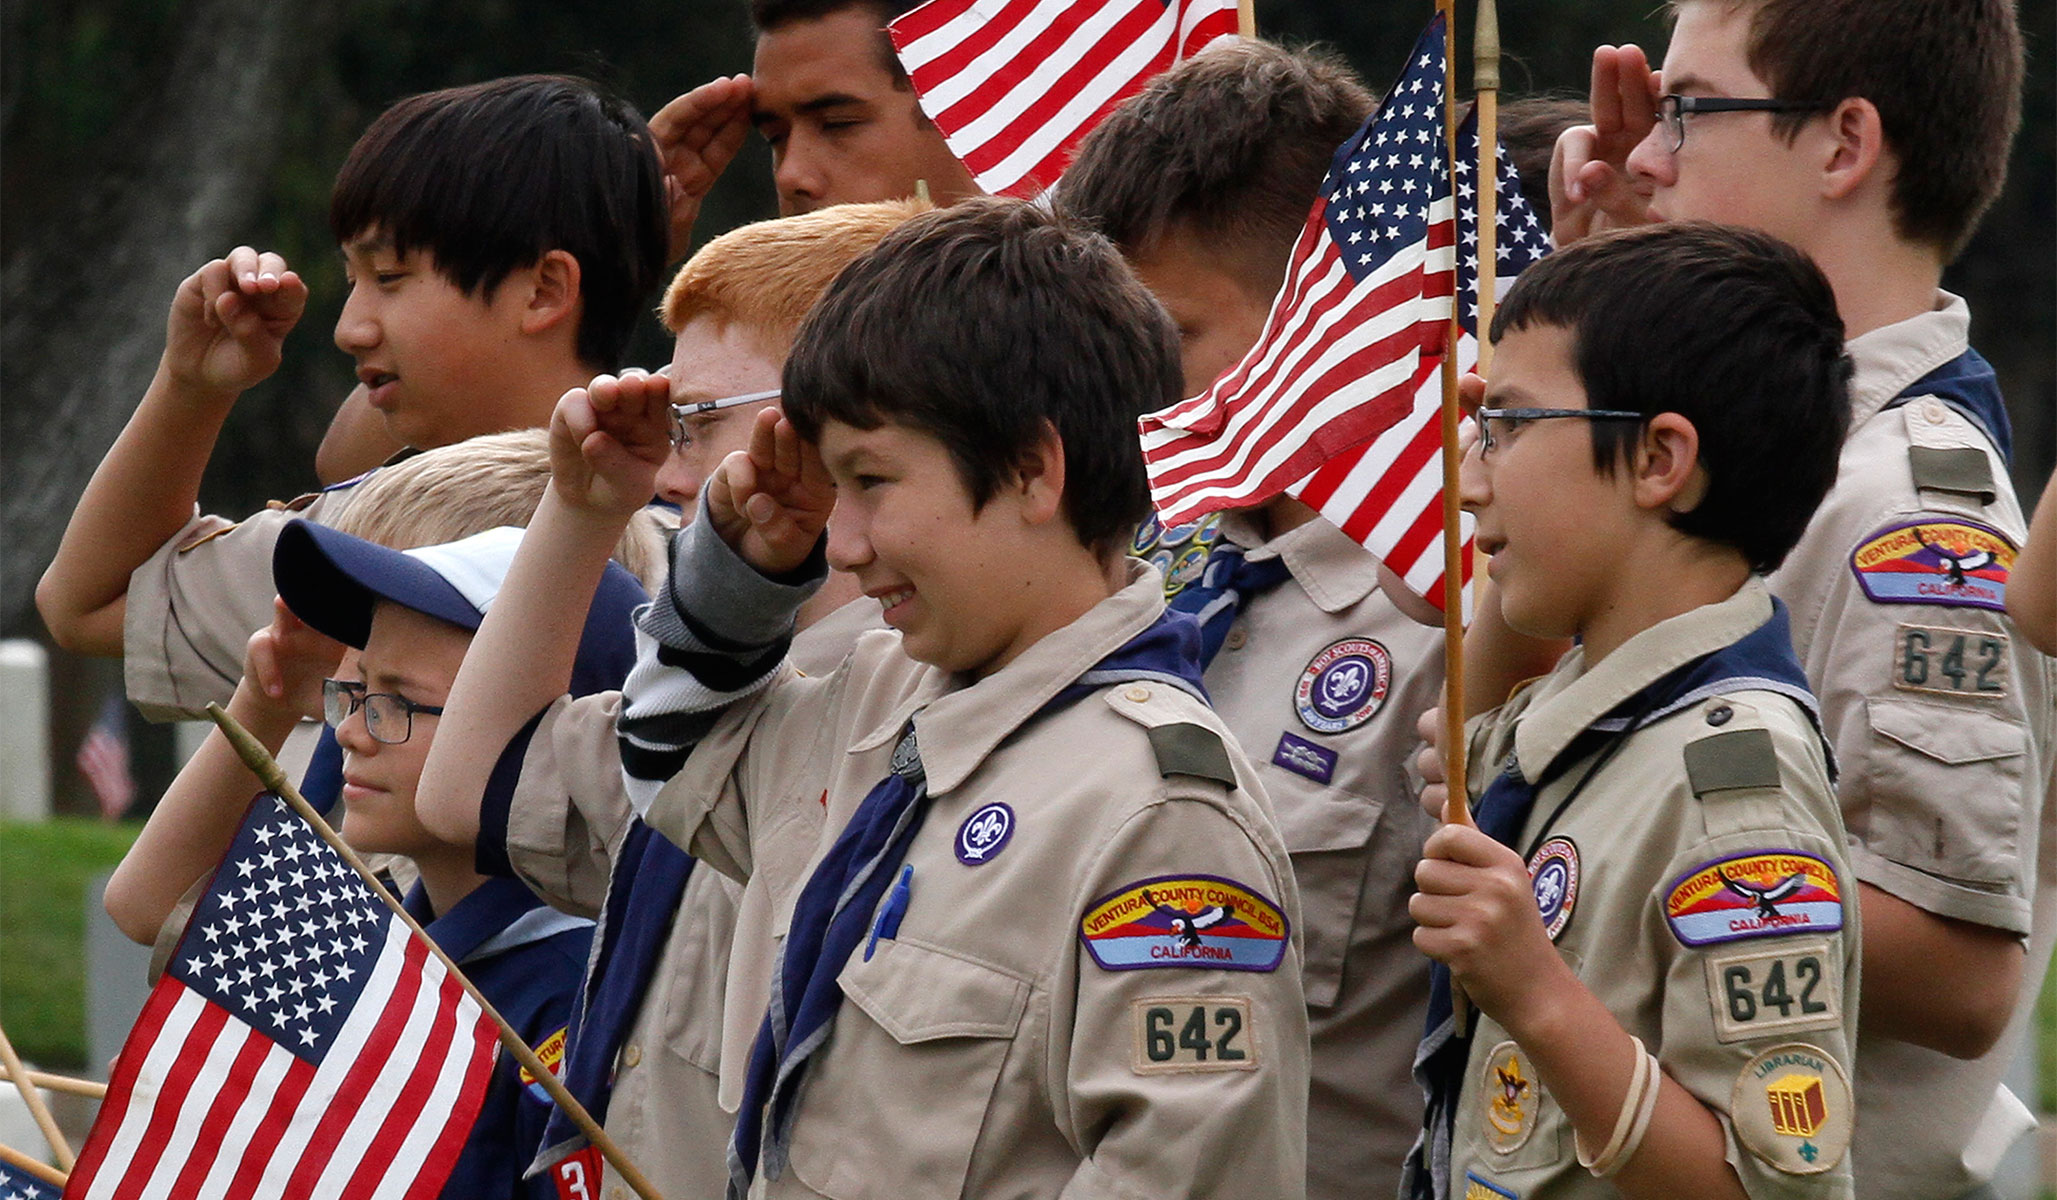 Boy Scouts Allow Girls to Participate, but Its Still the Boy Scouts National Review picture pic